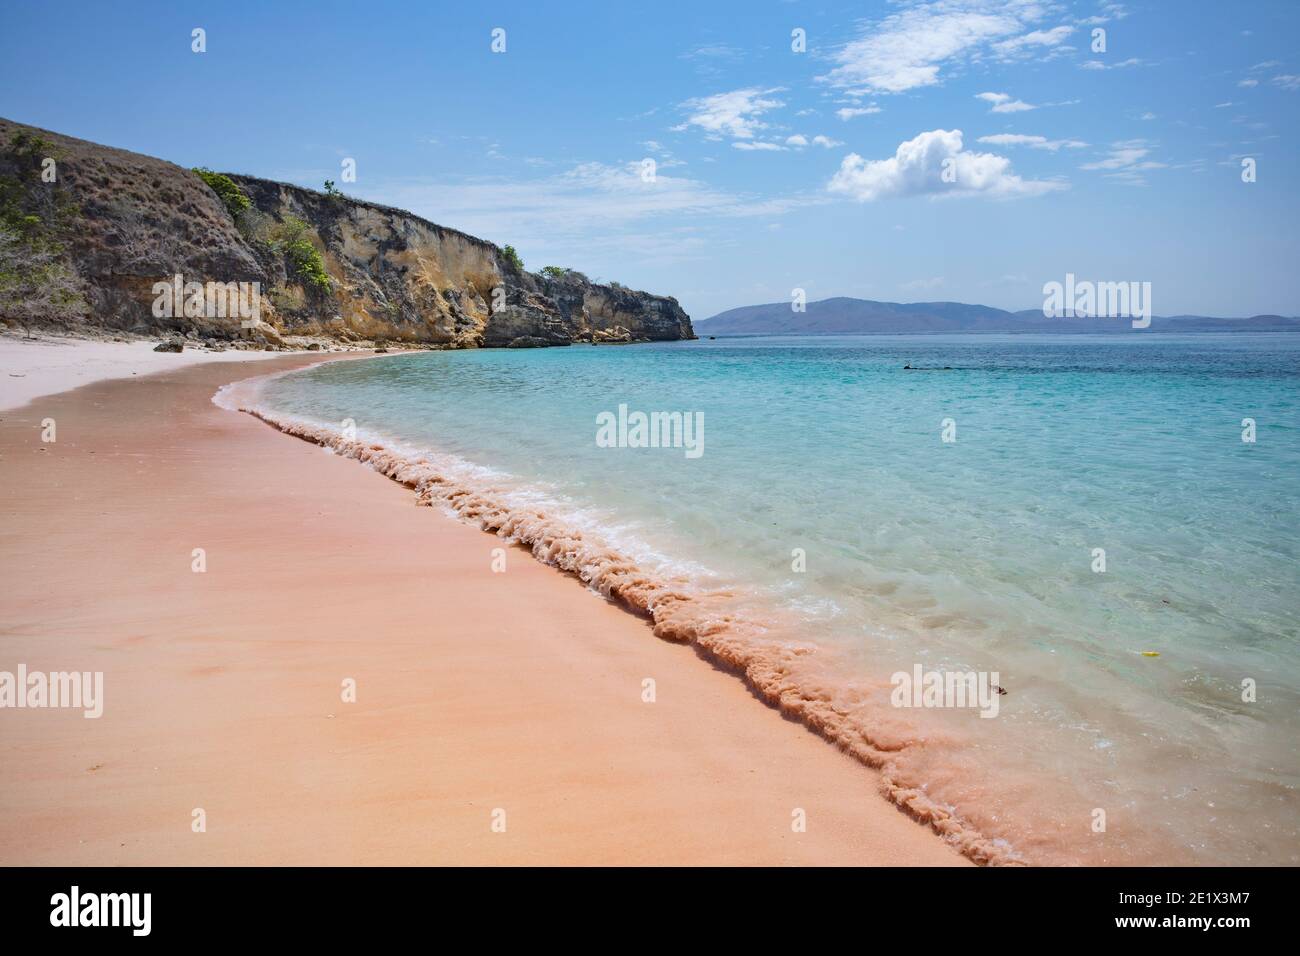 soft waves crashing on the remote pink beach in Komodo National Park in Indonesia Stock Photo